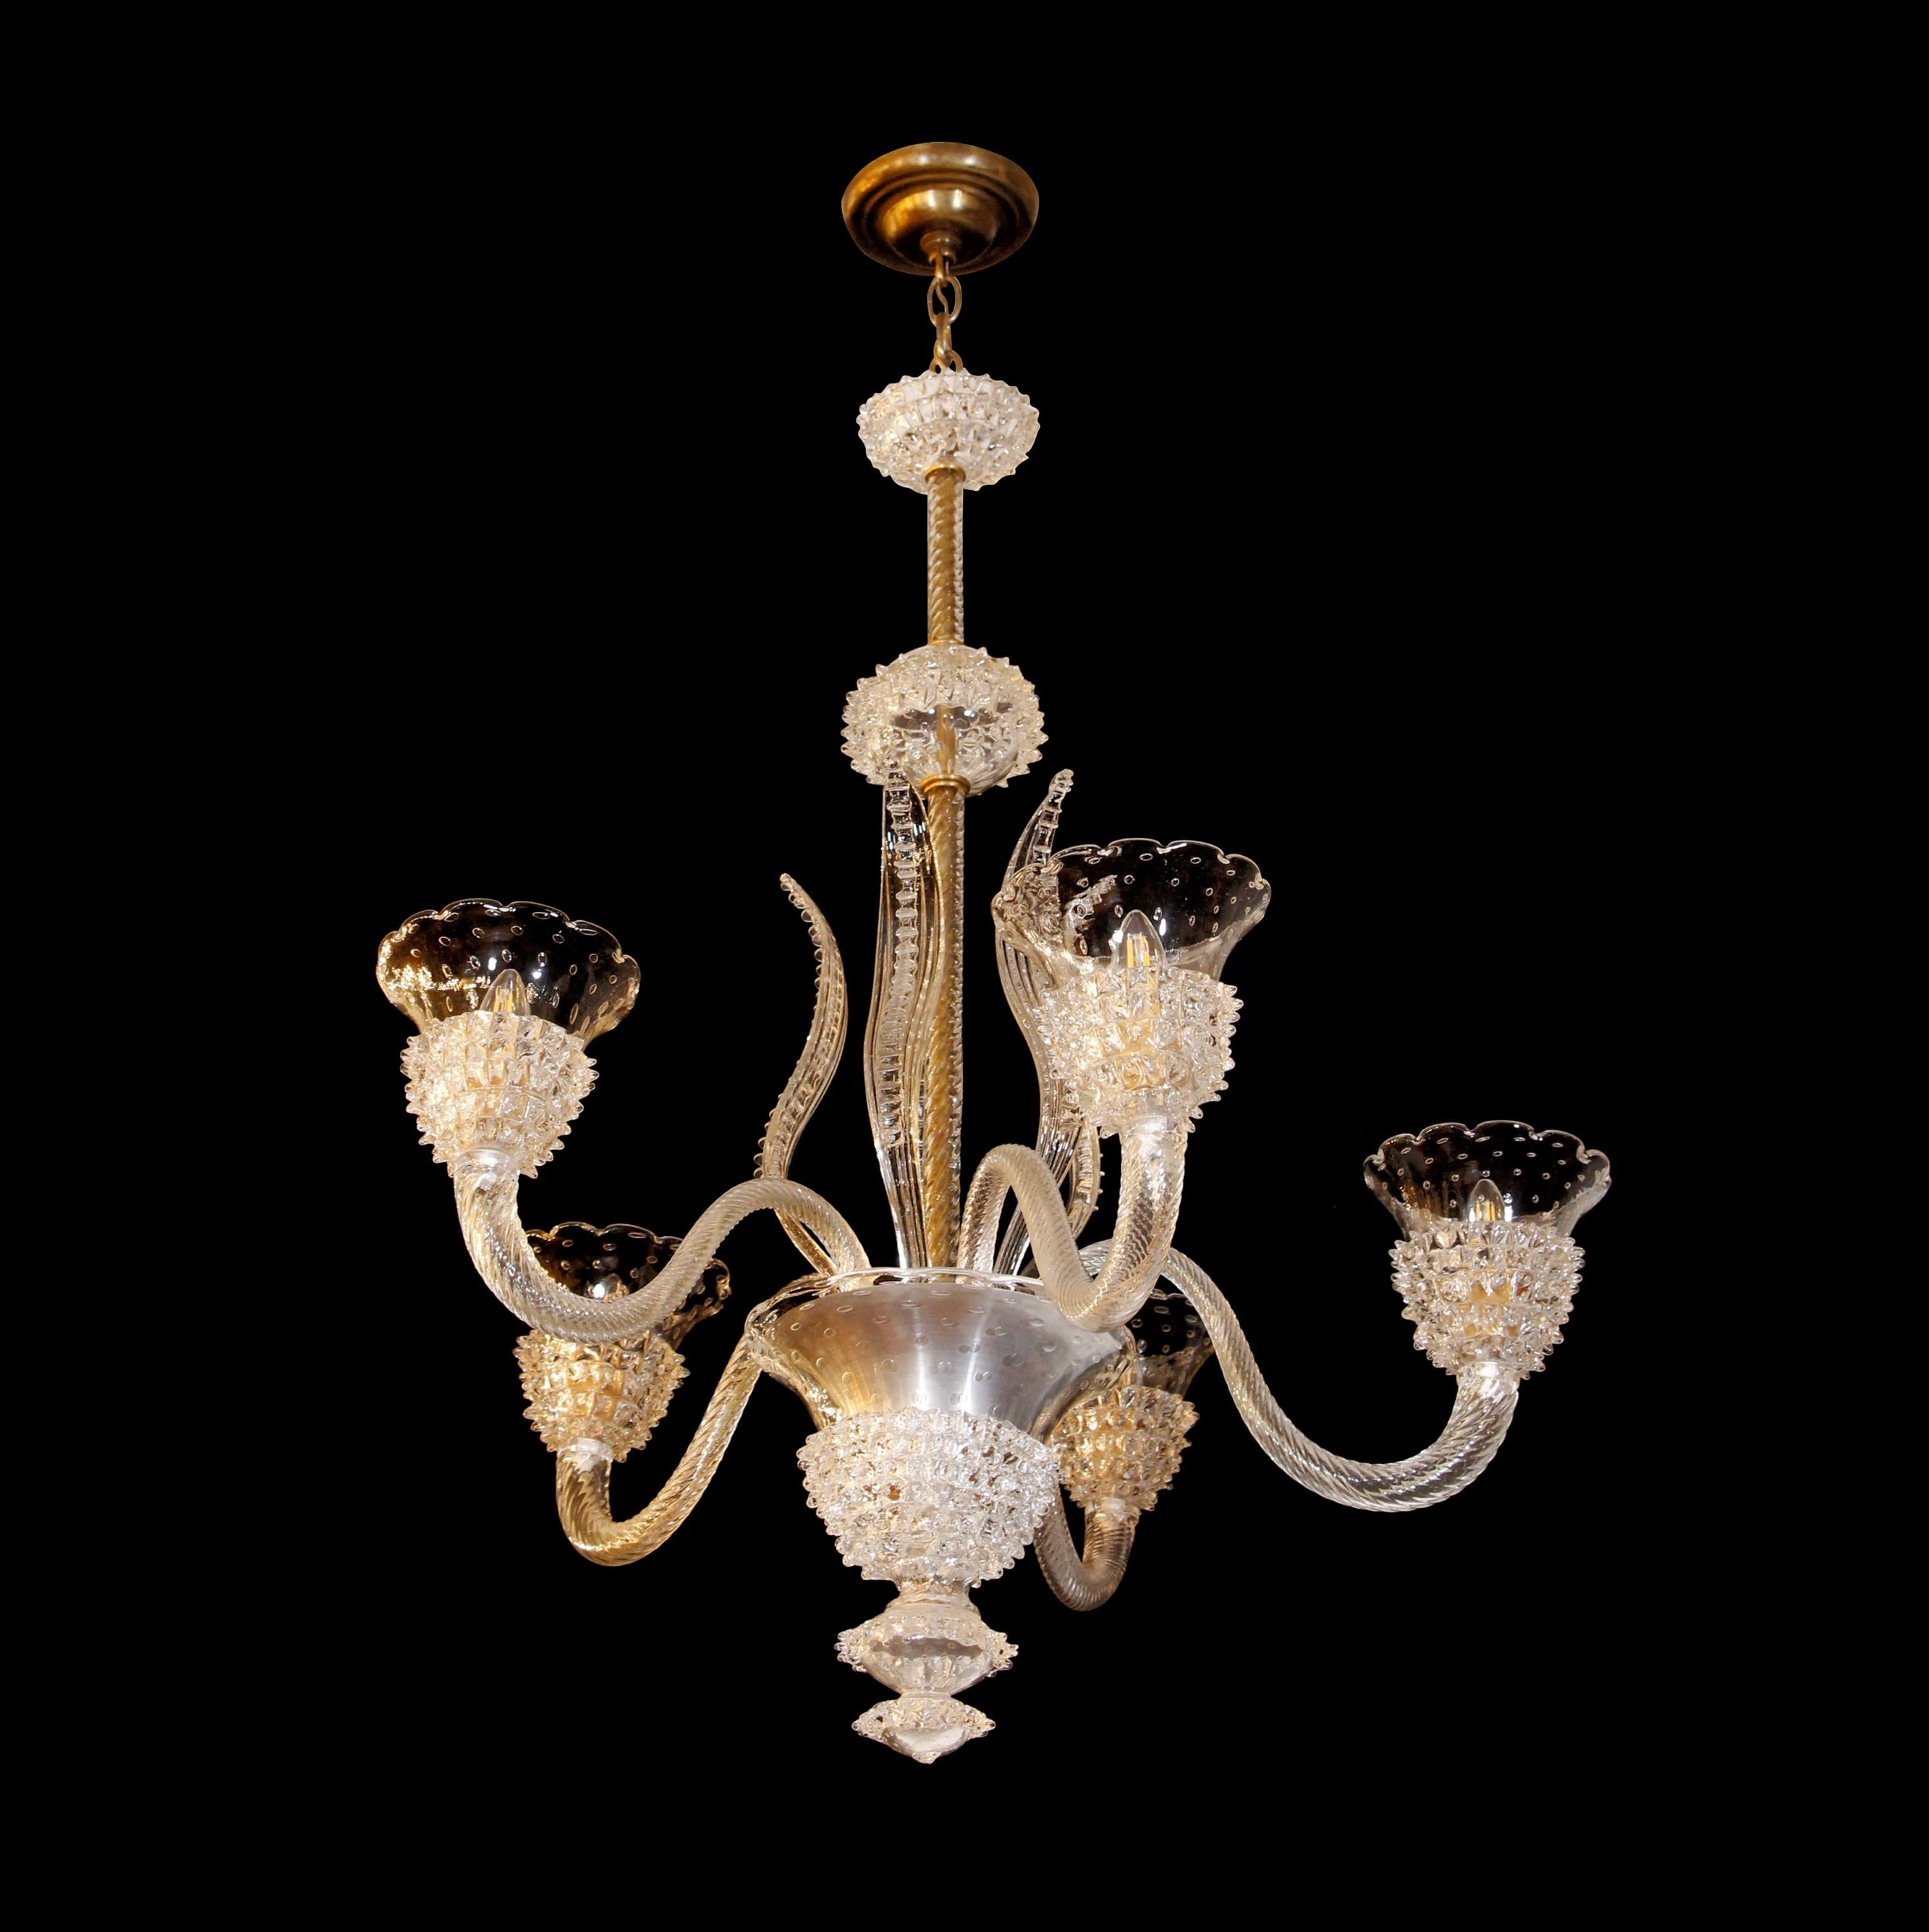 20th Century clear hand blown and hand formed Murano glass chandelier. Featuring a floral design with five arms and control bubble rostrato glass bowls hanging from a brass chain and canopy. Cleaned and rewired. Please note, this item is located in